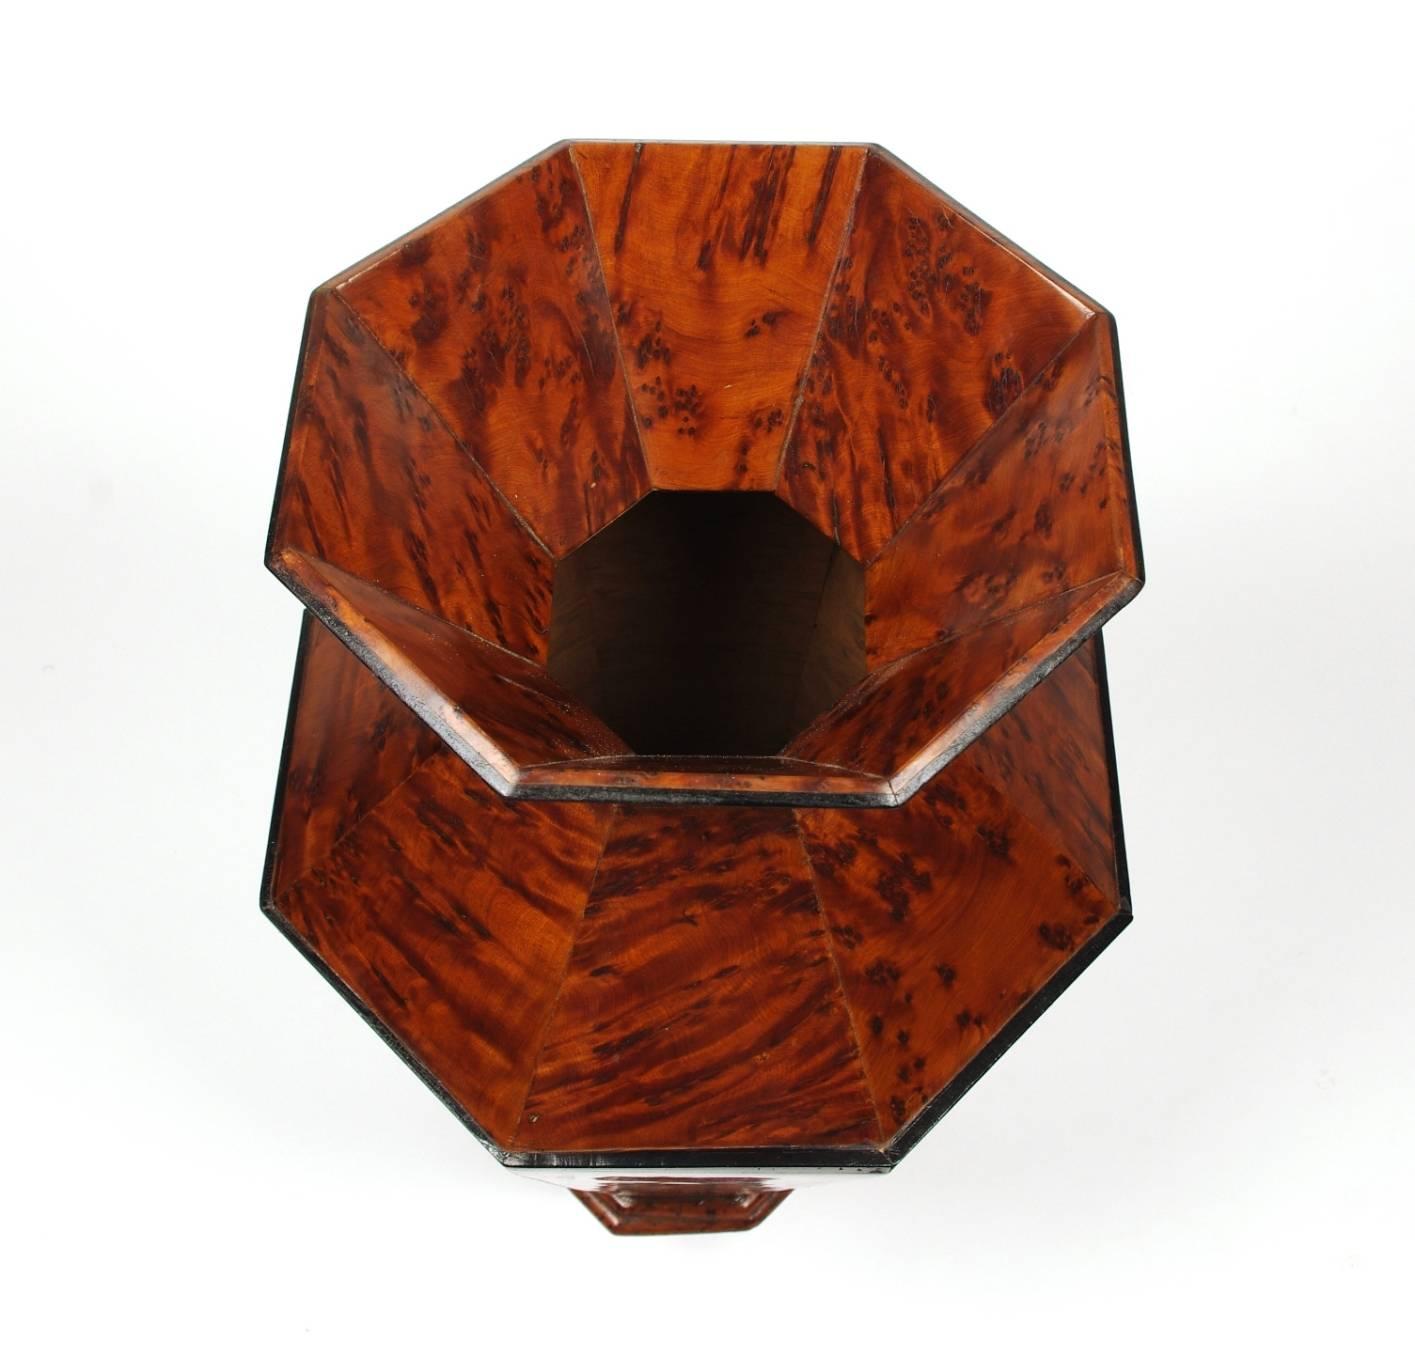 Rare Biedermeier burr yew spittoon of octagonal shape, the rim, neck and shoulder with ebony molding. Interestingly, spittoons were a standard home furnishing during the Biedermeier period. They were not placed discreetly in the corner, as we might